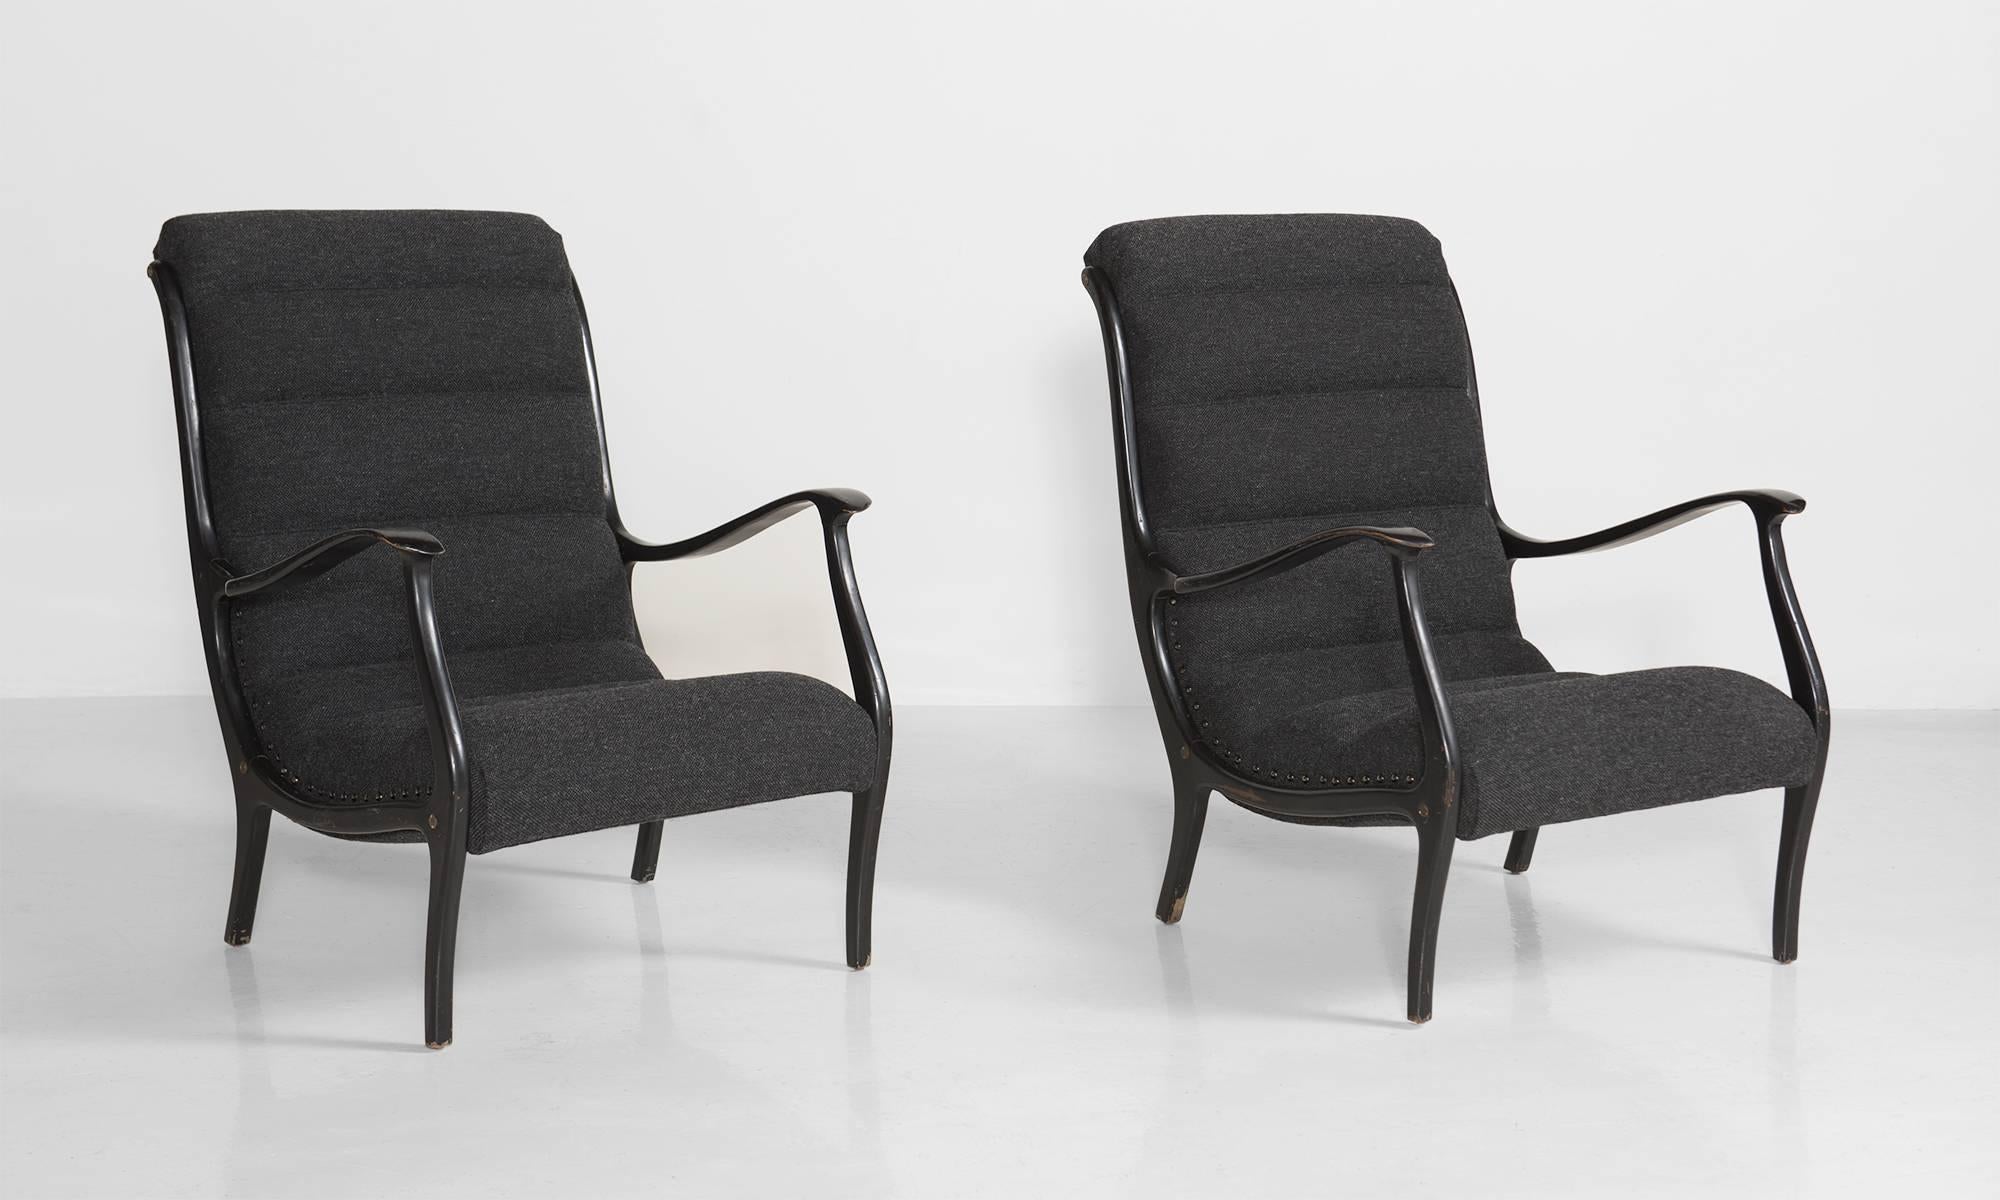 Bentwood armchairs, newly upholstered with Maharam fabric. Designed by Ezio Longhi for Elam.